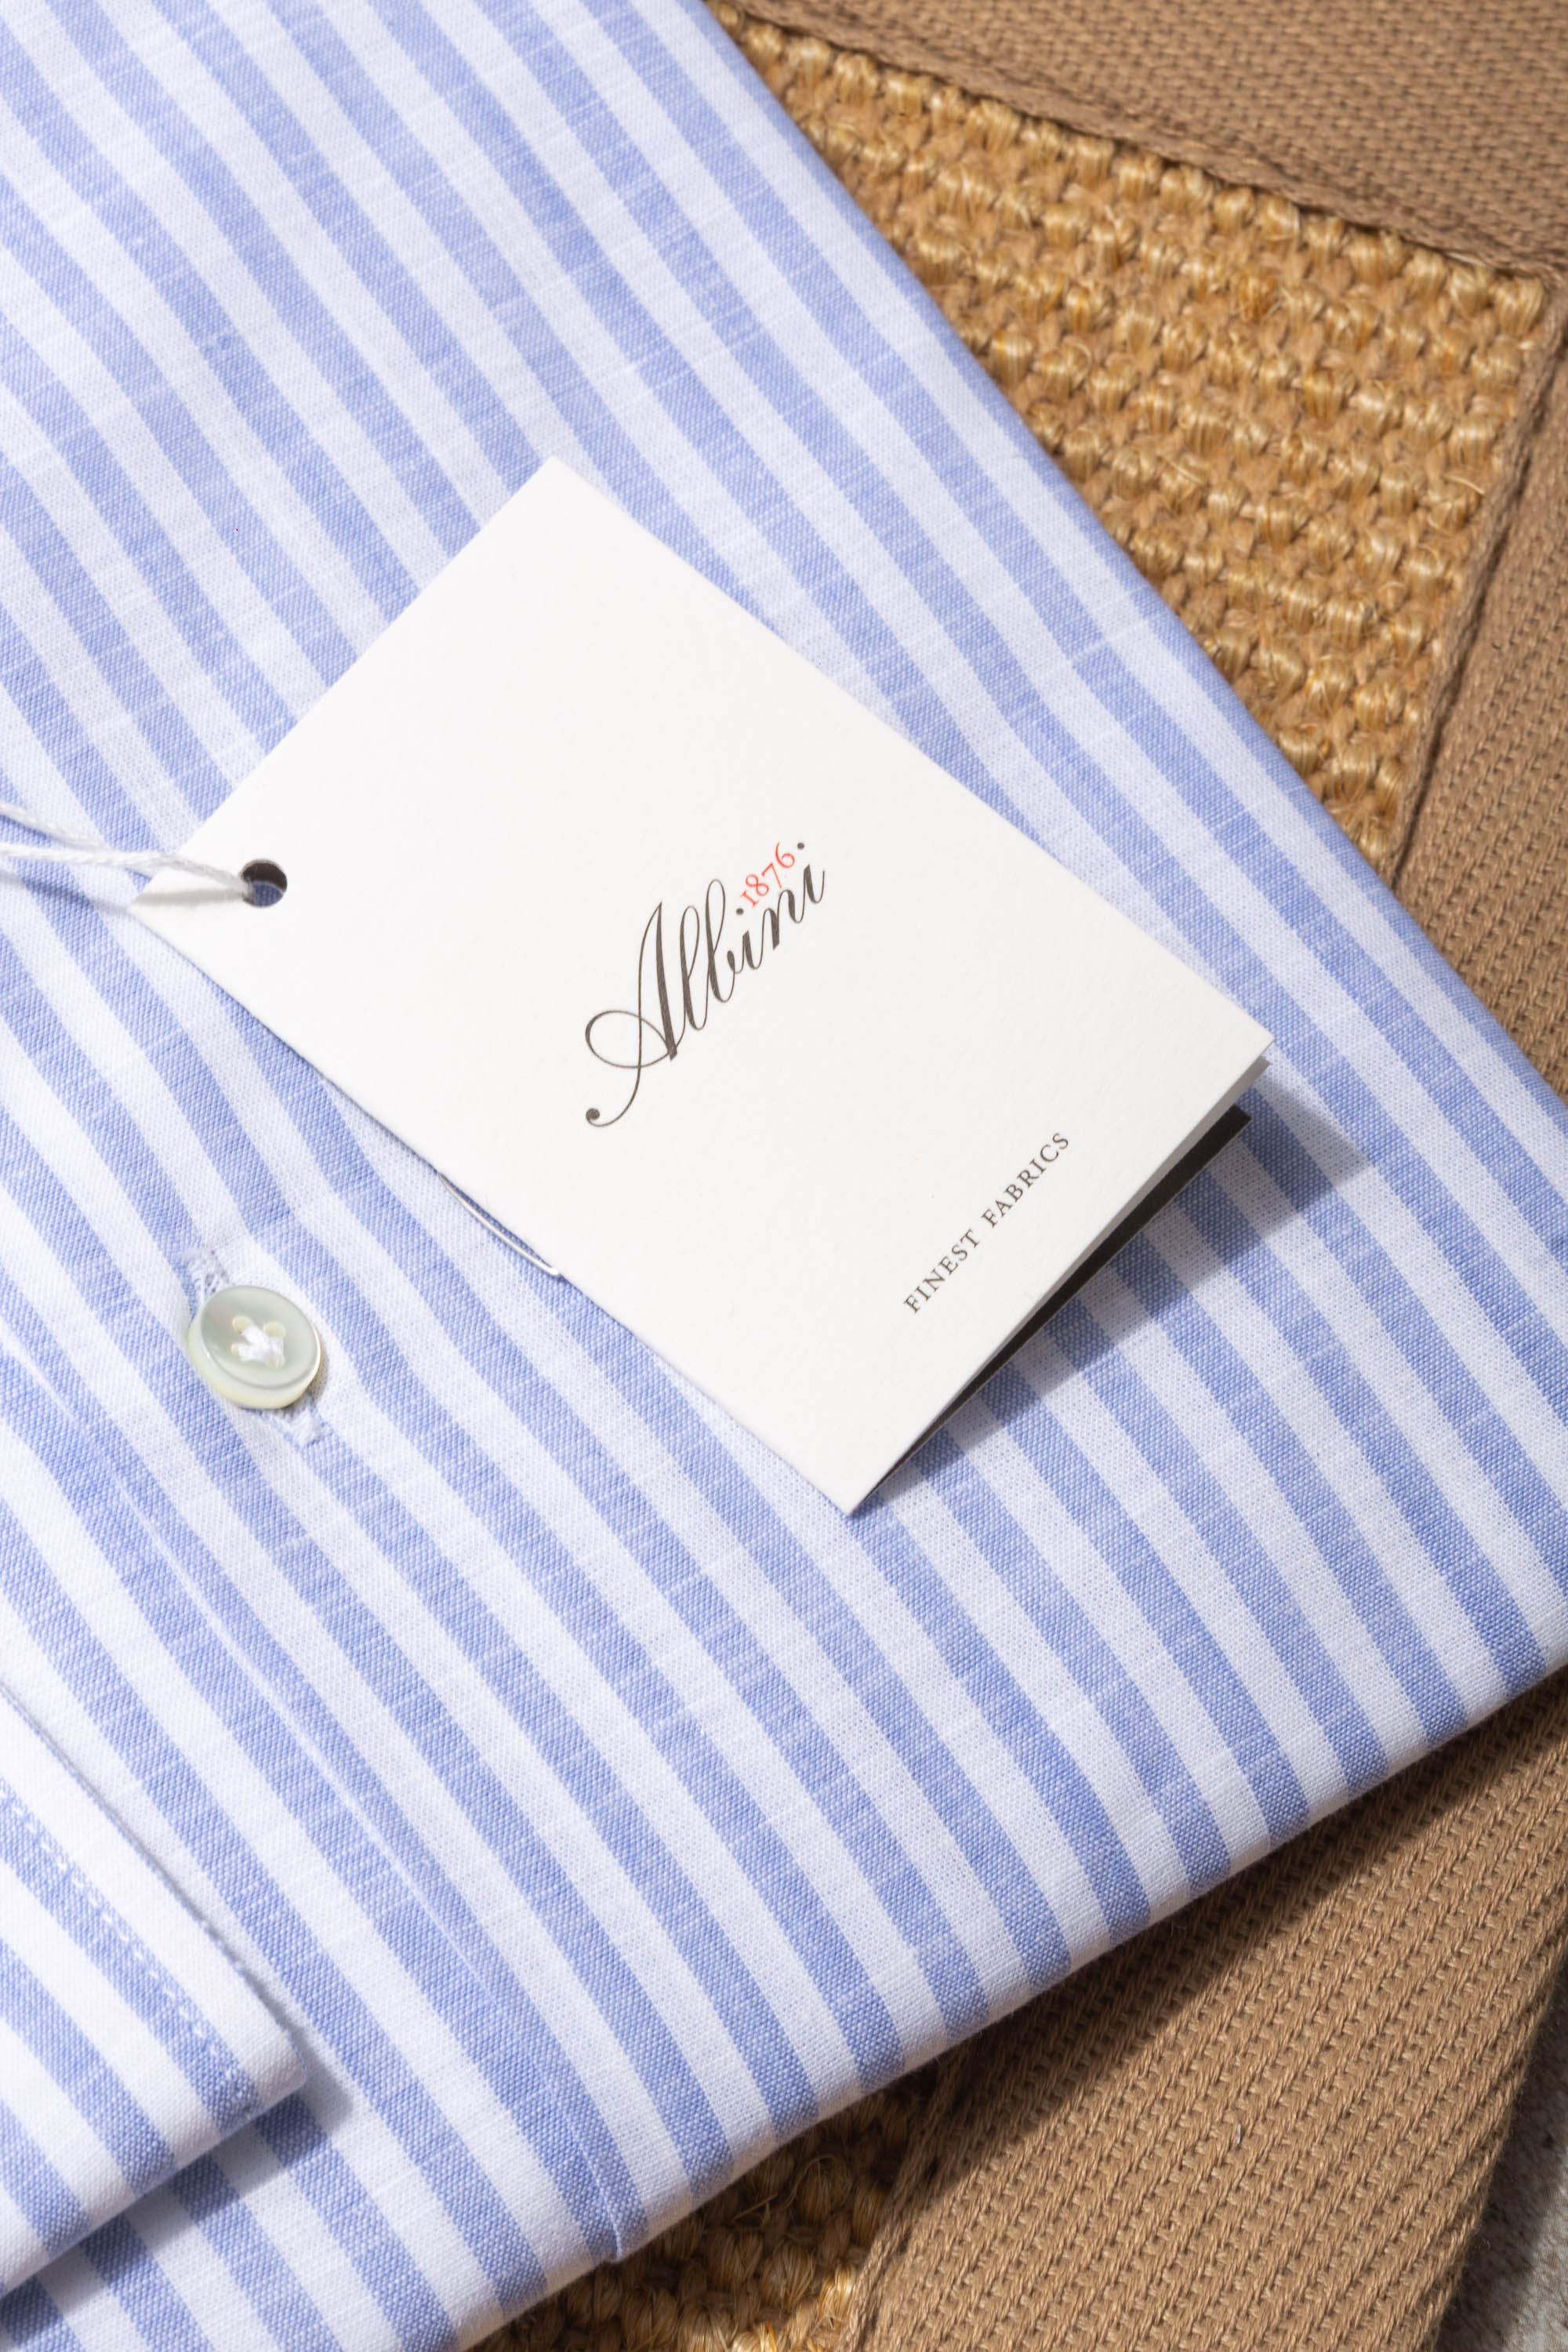 Button down light blue striped shirt ”Sartoriale collection”- Made In